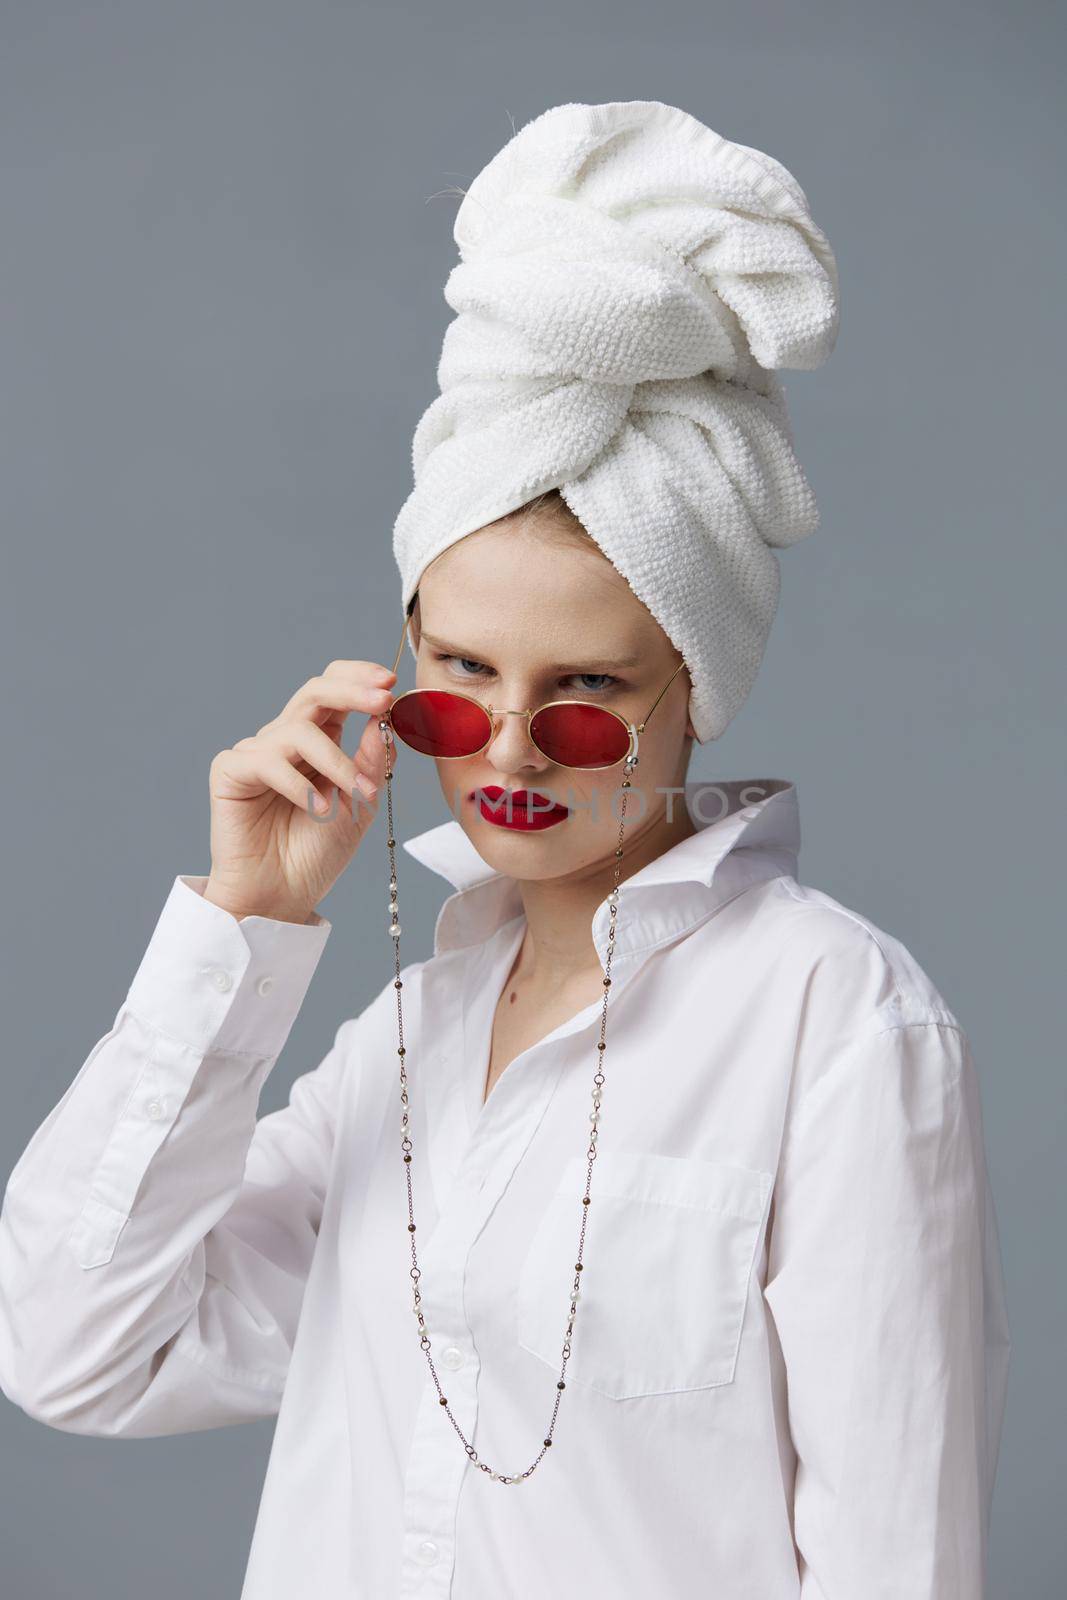 pretty woman red glasses towel on head makeup studio model unaltered. High quality photo